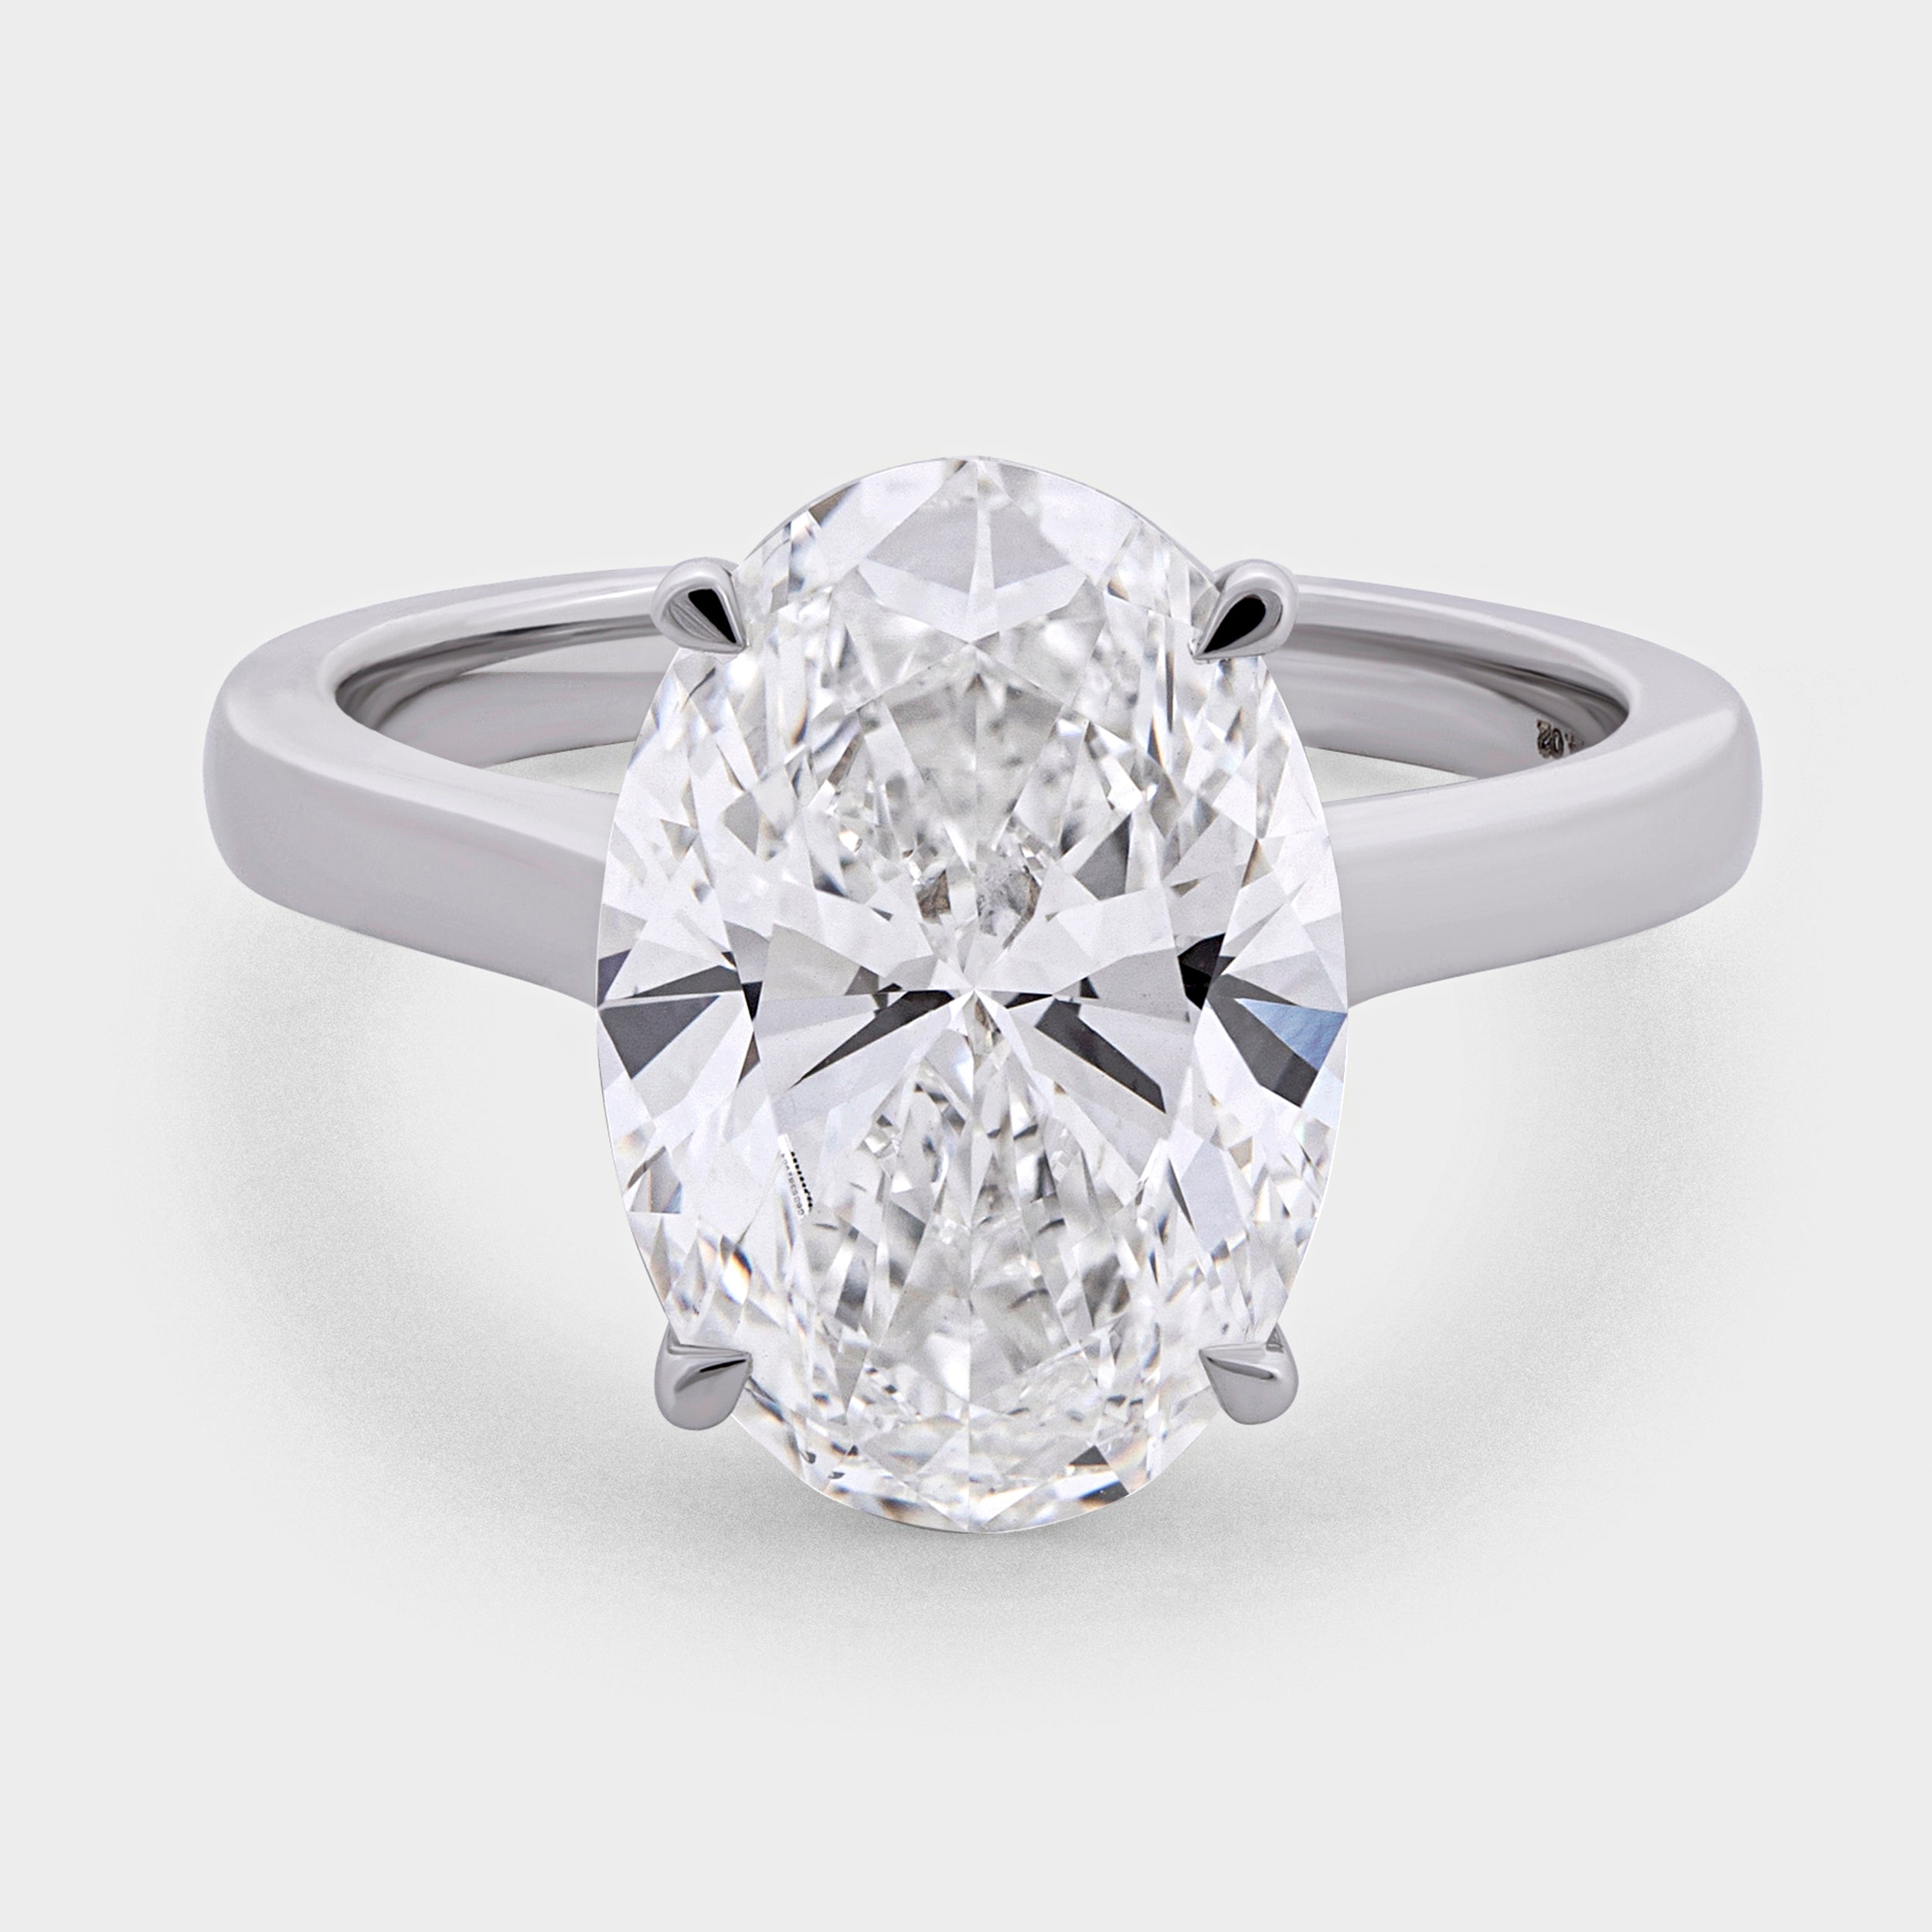 Oval Shaped 4.02 Carat Lab-Grown Solitaire Ring | SKU : 0020246006